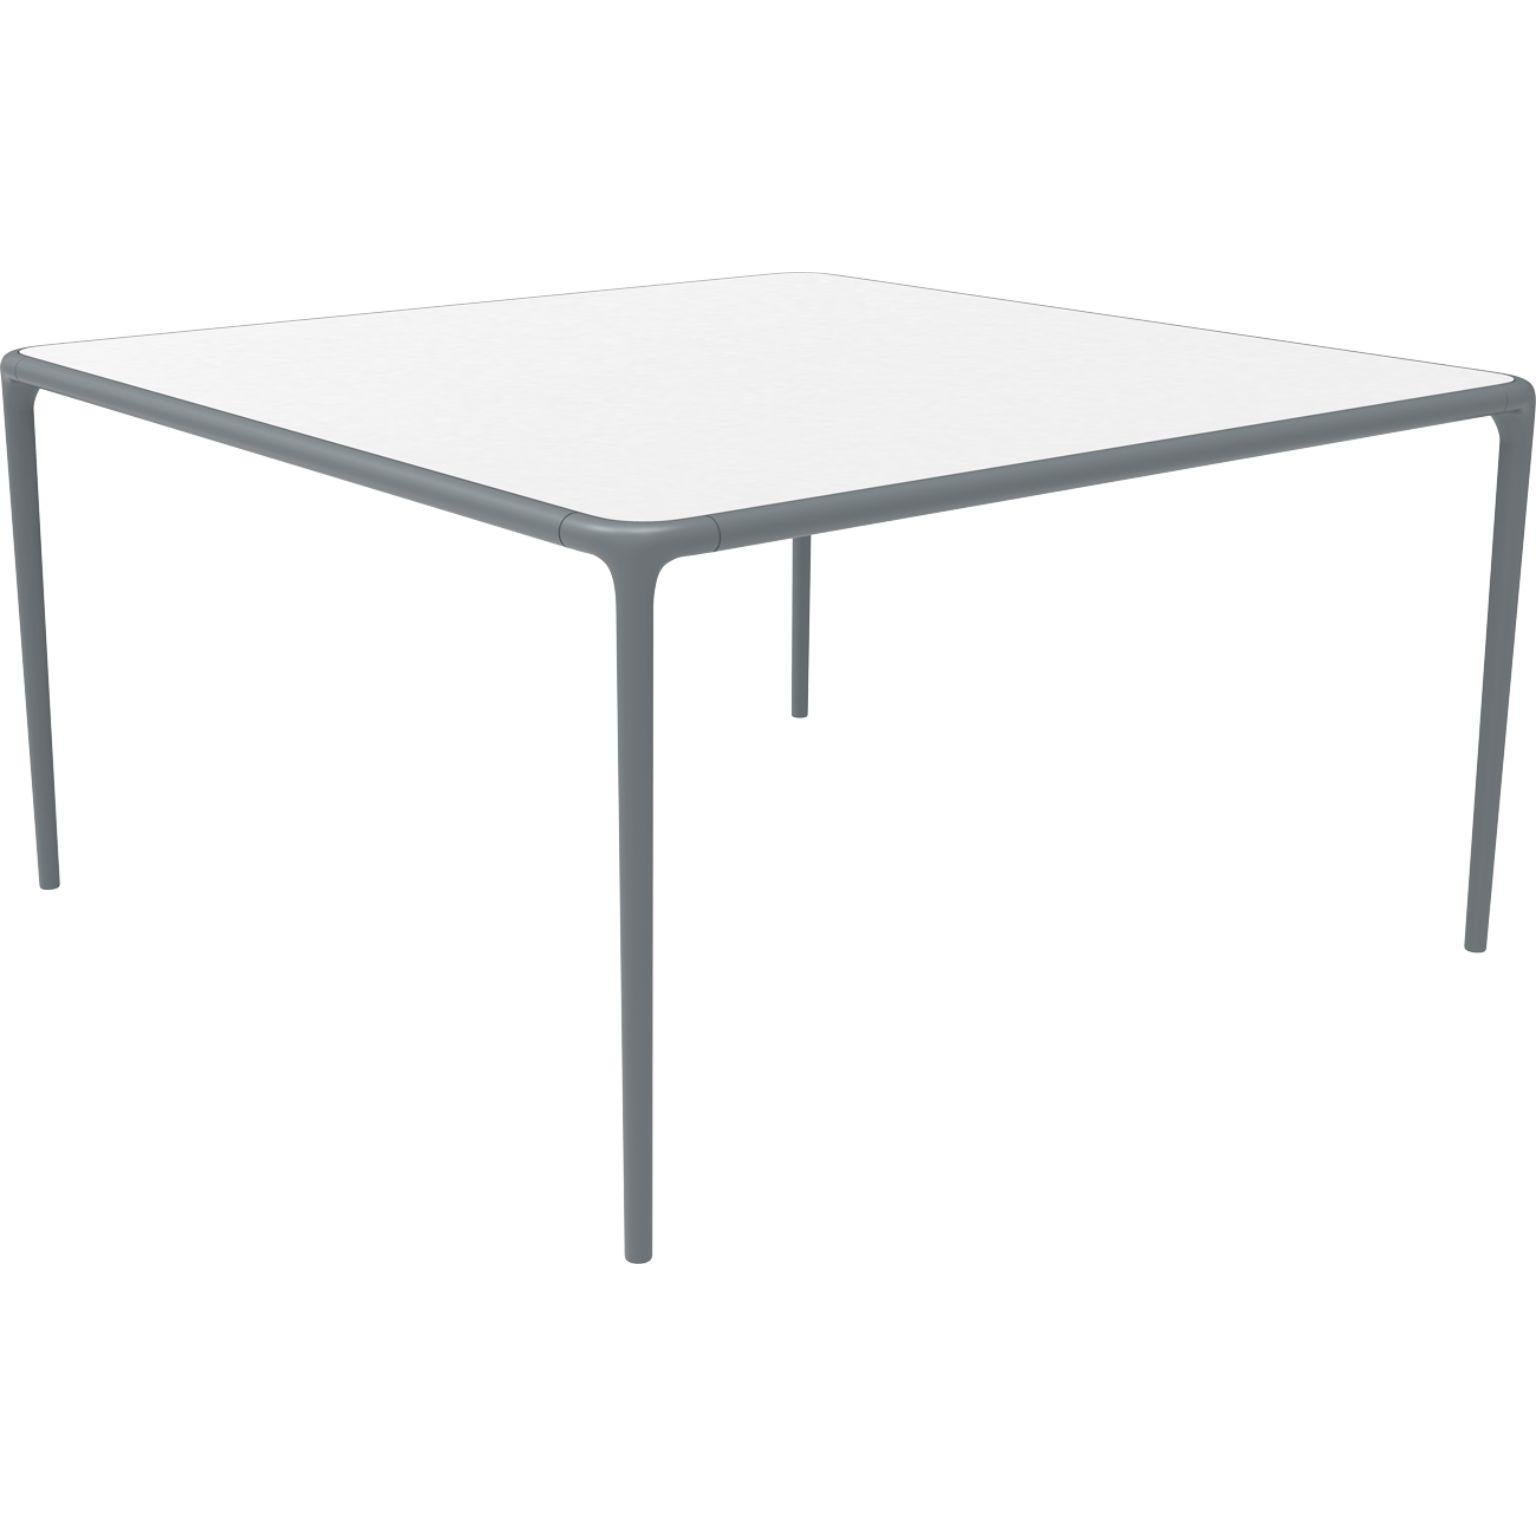 Xaloc grey glass top table 140 by MOWEE
Dimensions: D140 x W140 x H74 cm
Material: Aluminum, tinted tempered glass top.
Also available in different aluminum colors and finishes (HPL Black Edge or Neolith). 

 Xaloc synthesizes the lines of